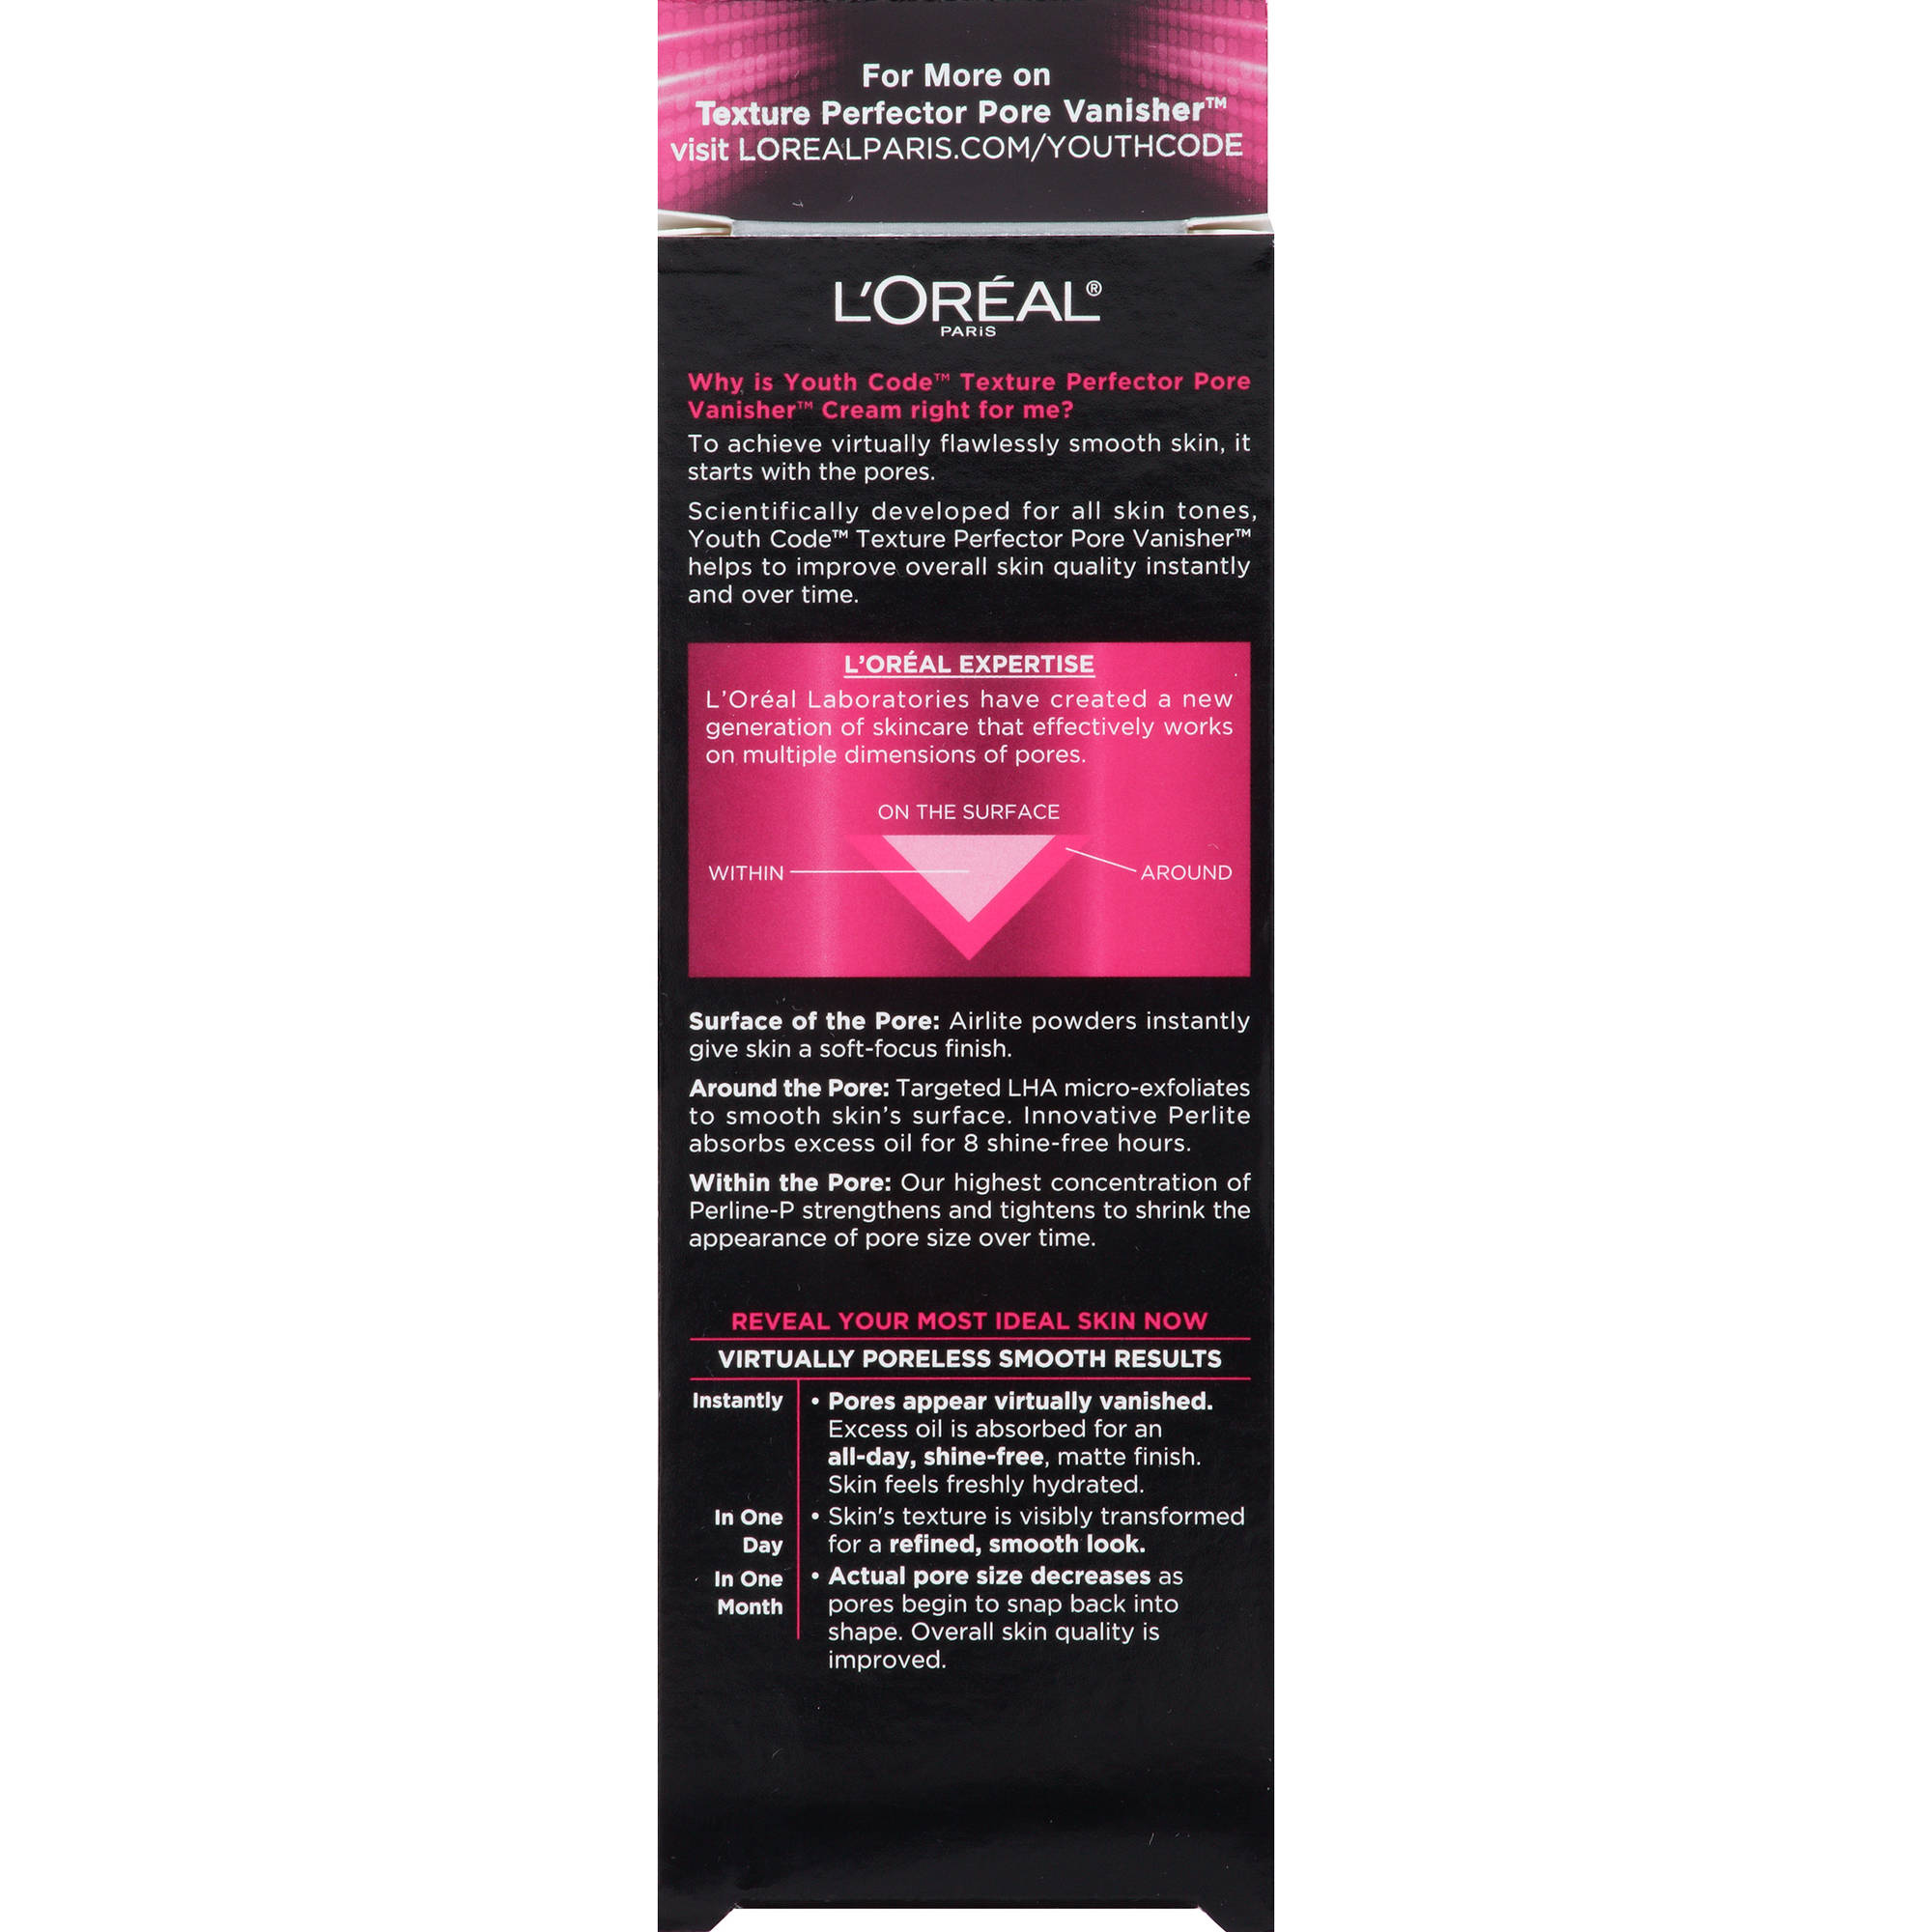 L'Oreal Loreal Youth Code Texture Perfector, 1.4 oz - image 2 of 3